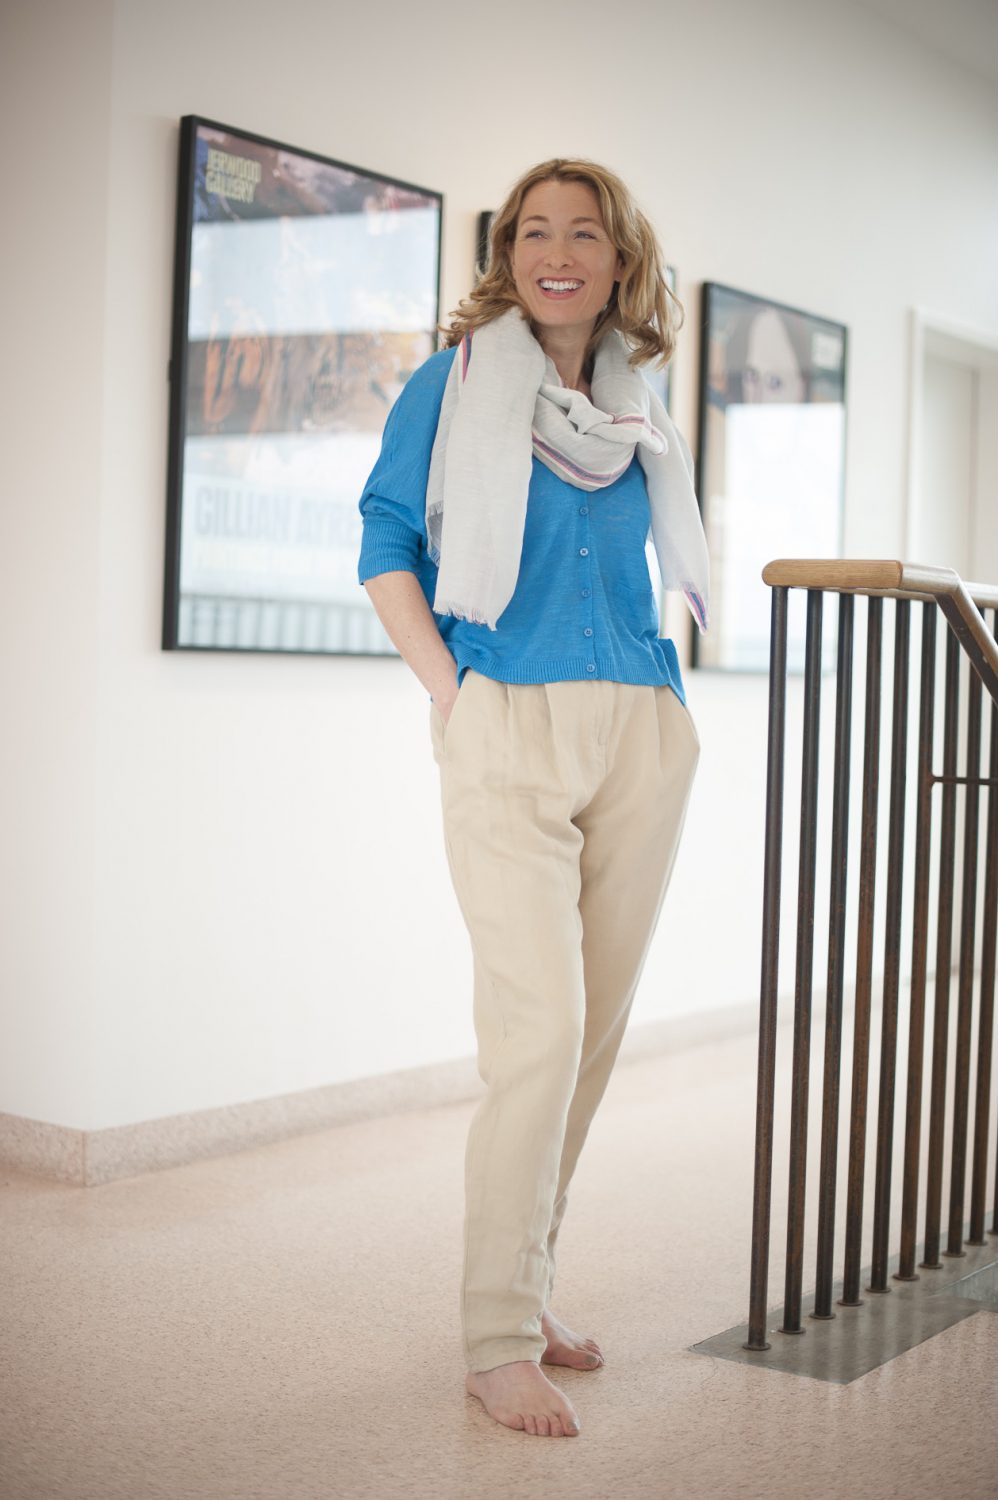 erse turquoise cardigan, £89, Otto D’ame beige chino trousers, £139, Who’s Wearing What Boutique, St Leonards-on-Sea 01424 272925 www.whoswearingwhat-boutique.co.uk; Seasalt scarf, £29.95, Charity Farm Countrystore, Cranbrook 01580 713189 www.charityfarmcountrystore.co.uk